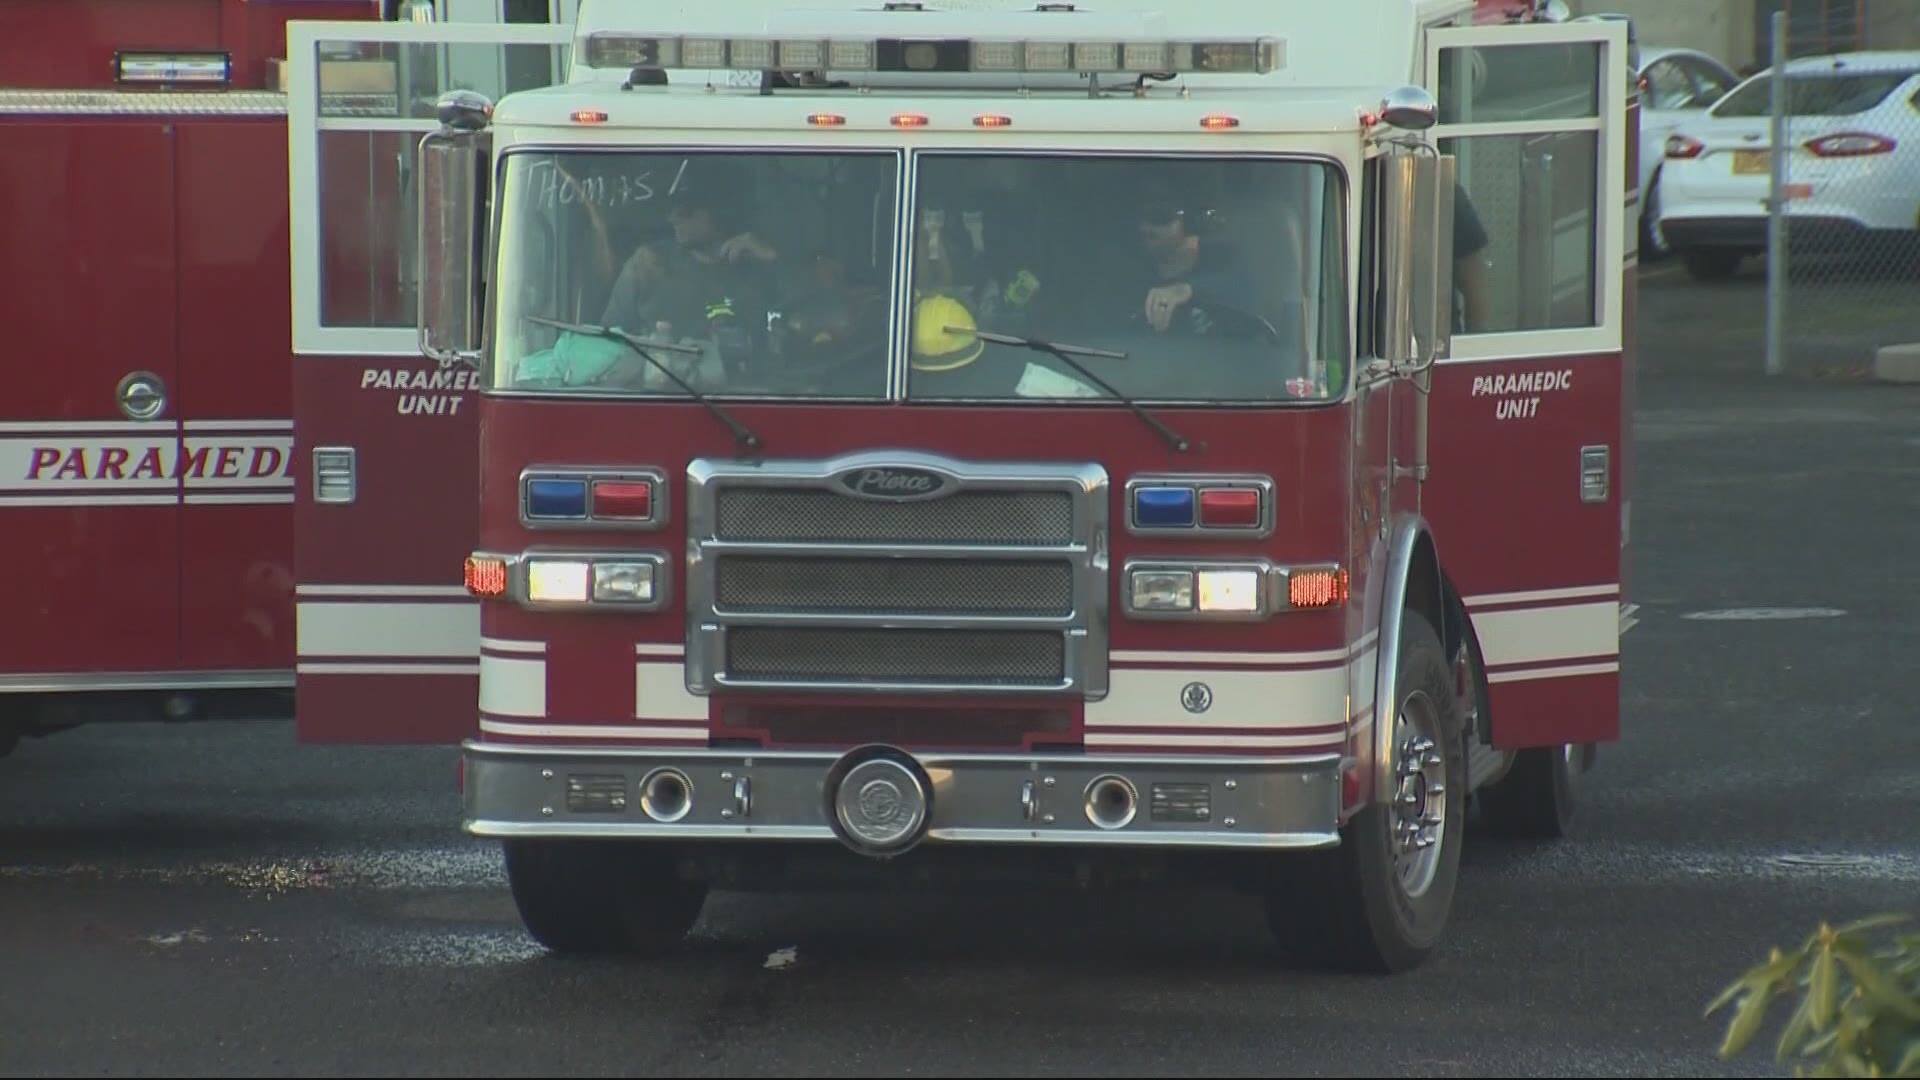 Because of the economy and COVID, the city of Portland is asking agencies to scale back this year. Galen Ettlin reports on what that means for fire and rescue.